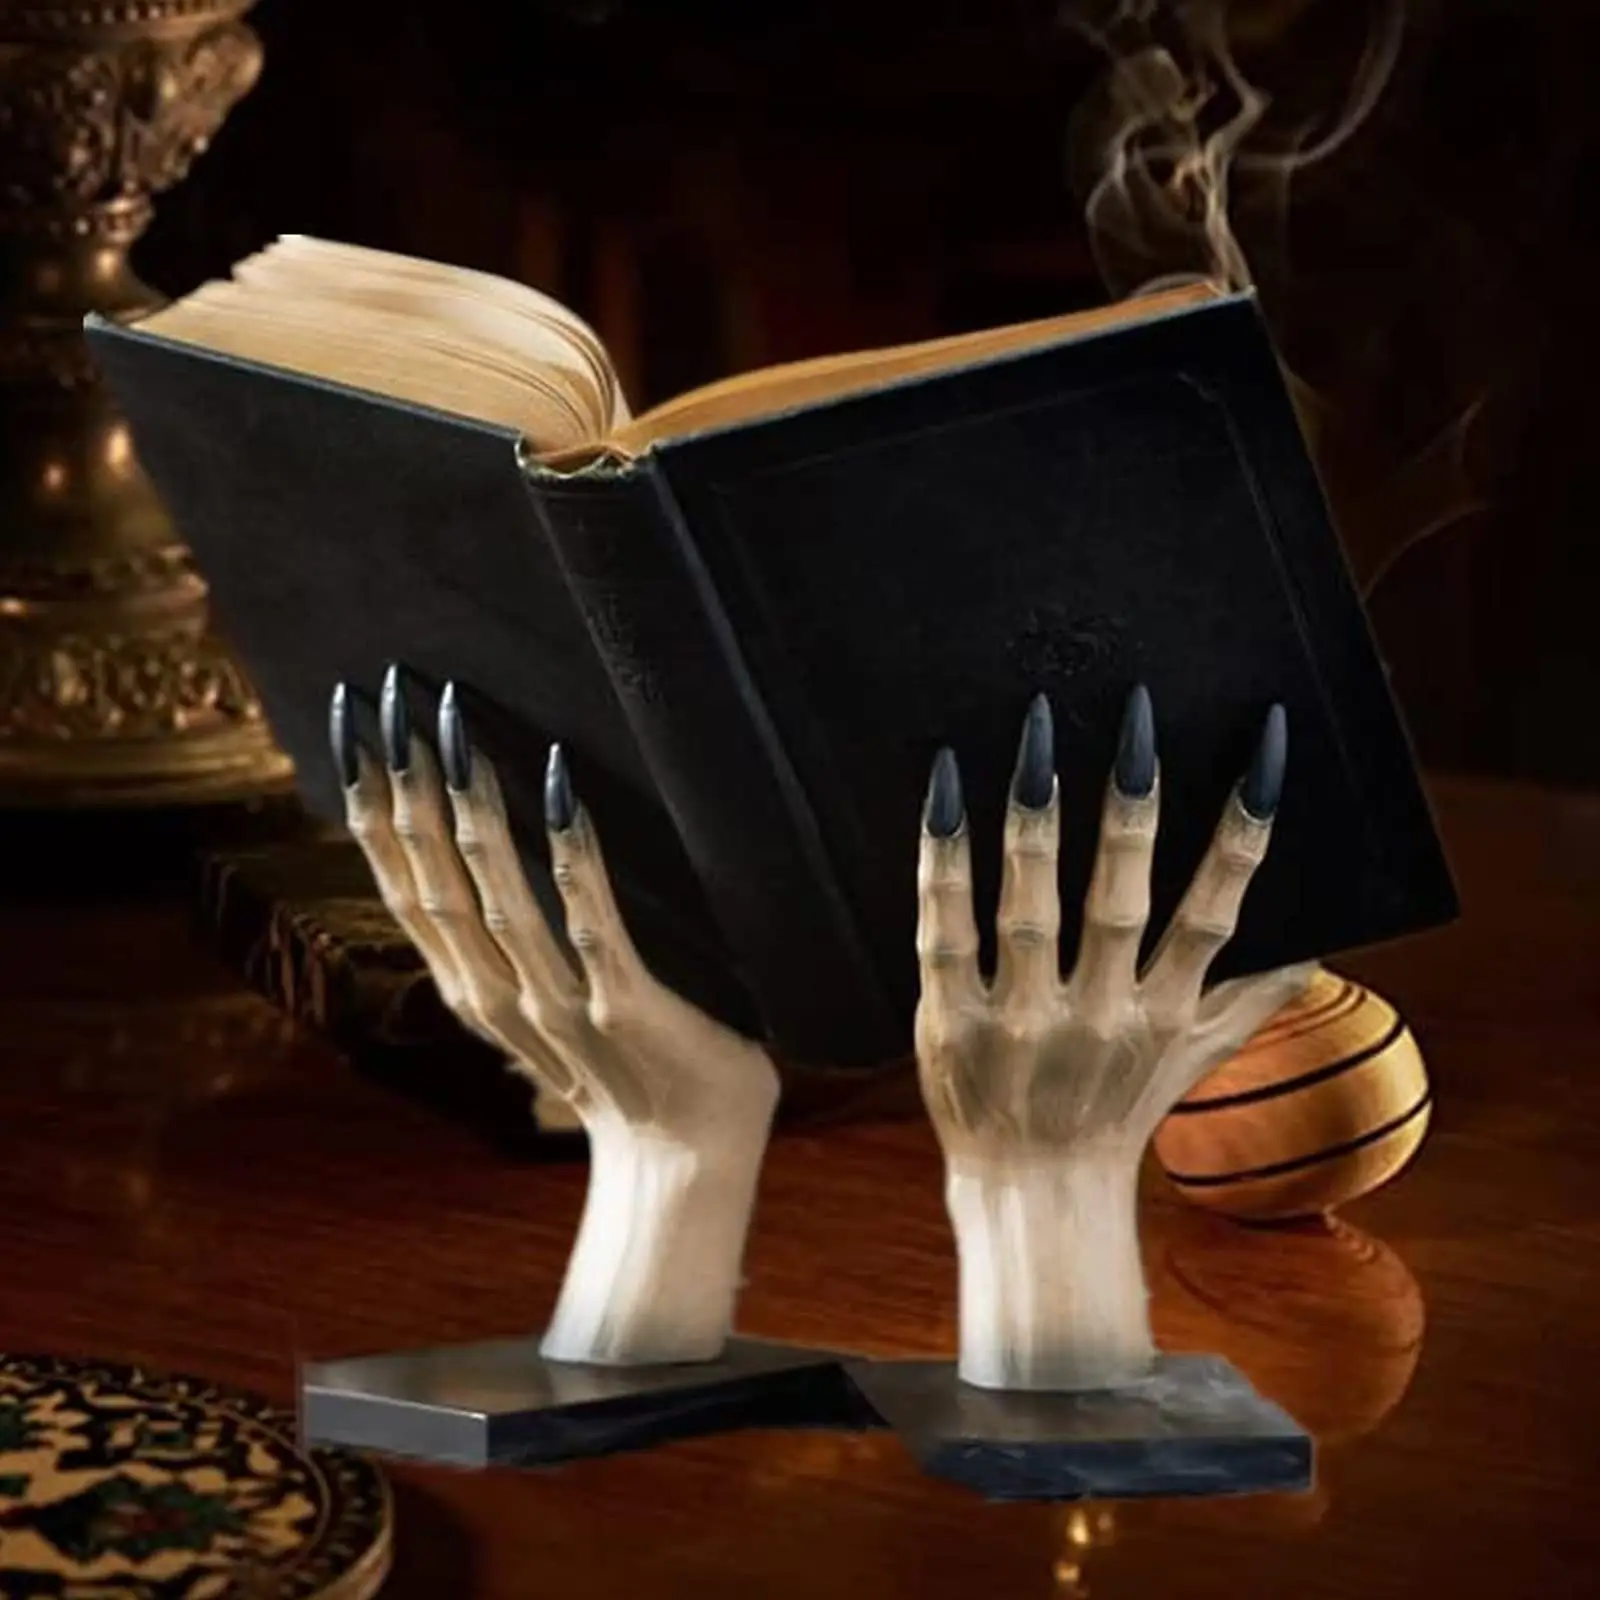 Halloween Bookends Decor Gothic Home Decor Bookends Shelves Unique Scary Monster Hand Book Ends Spooky Halloween Room Decor